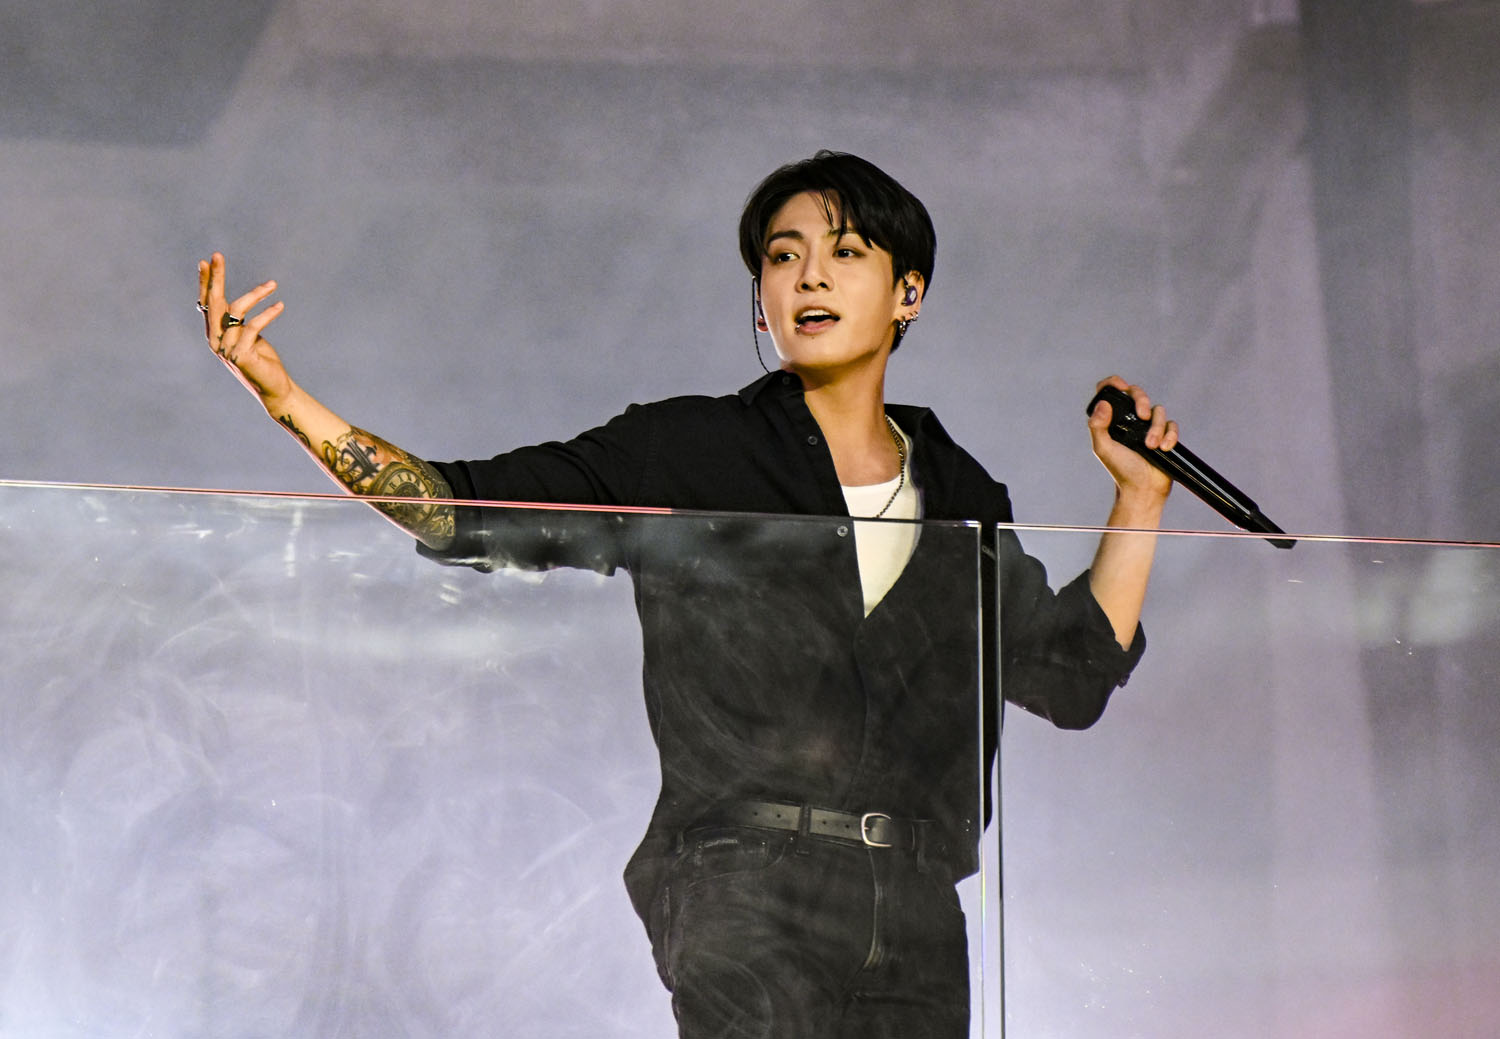 Jungkook takes over New York with multiple performances, including 